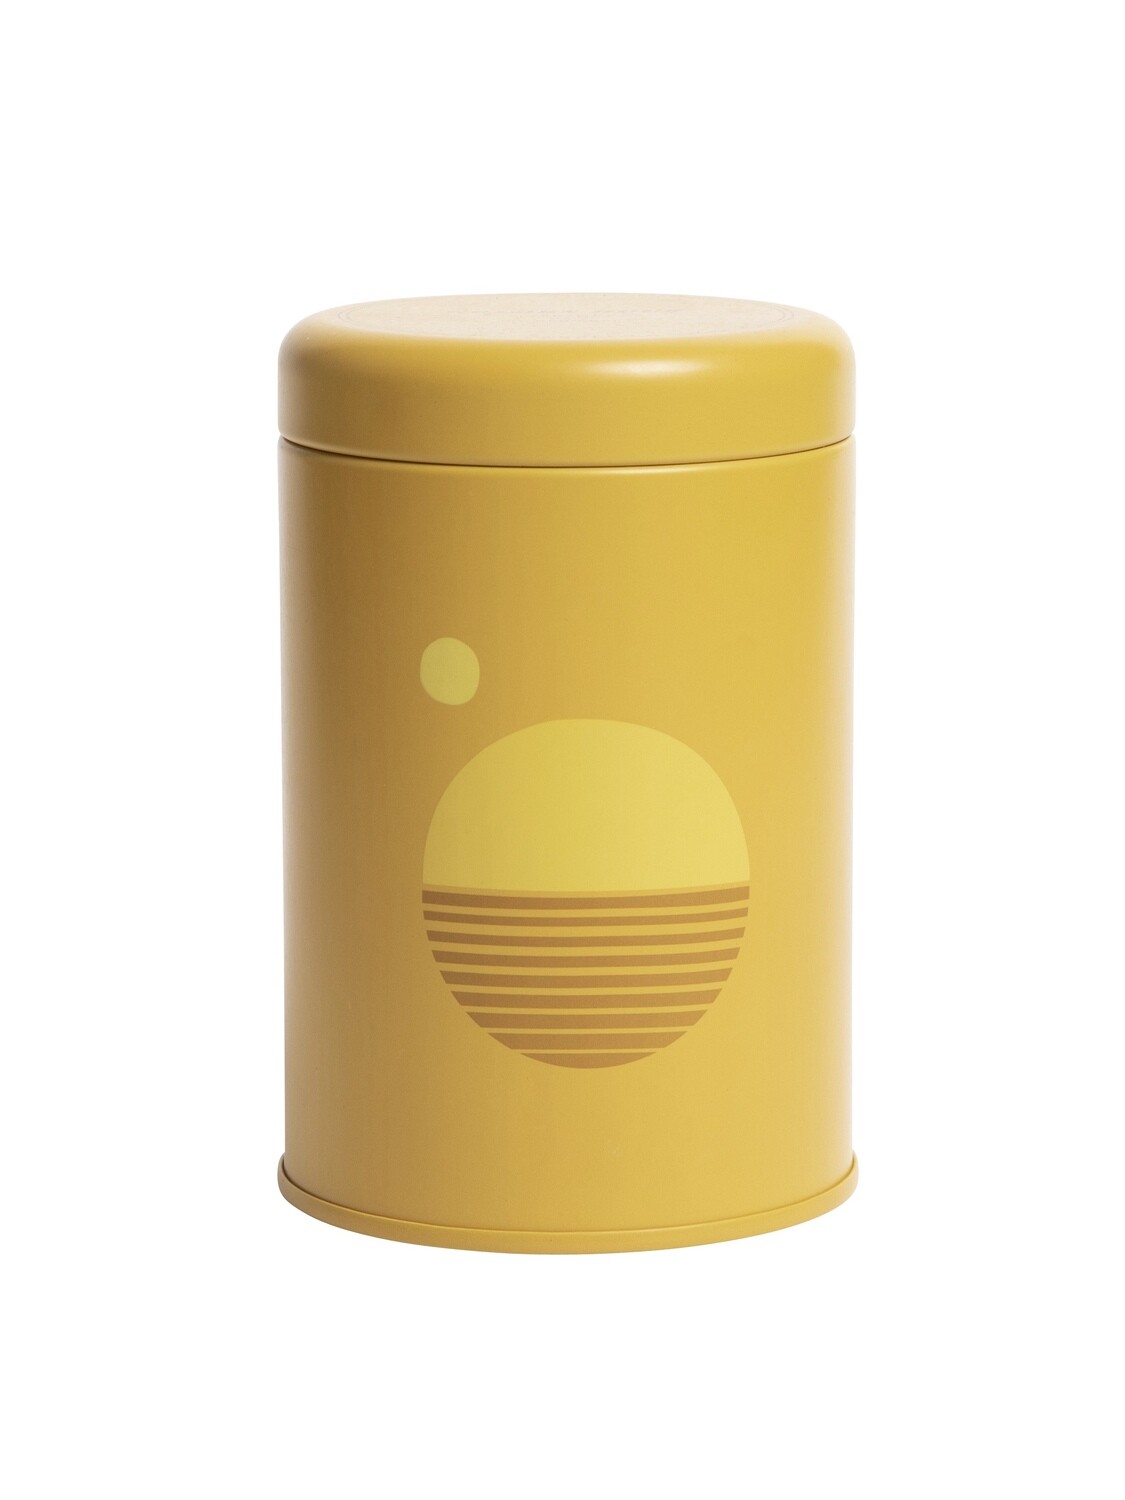 Golden Hour Sunset Soy Candle - P.F. Candle Co.